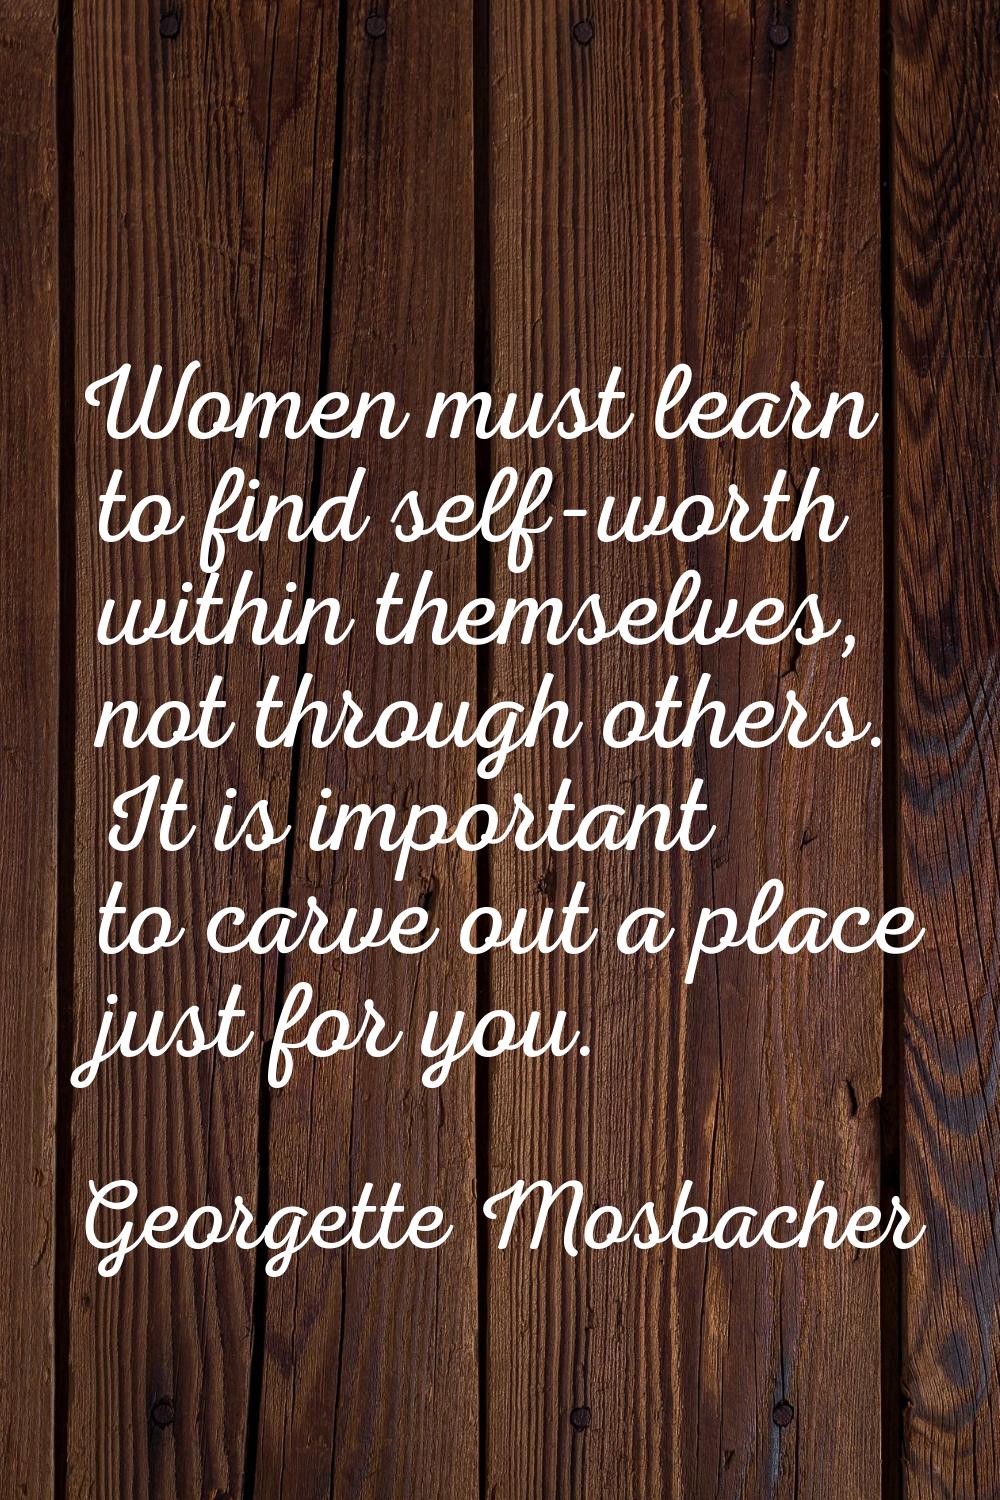 Women must learn to find self-worth within themselves, not through others. It is important to carve